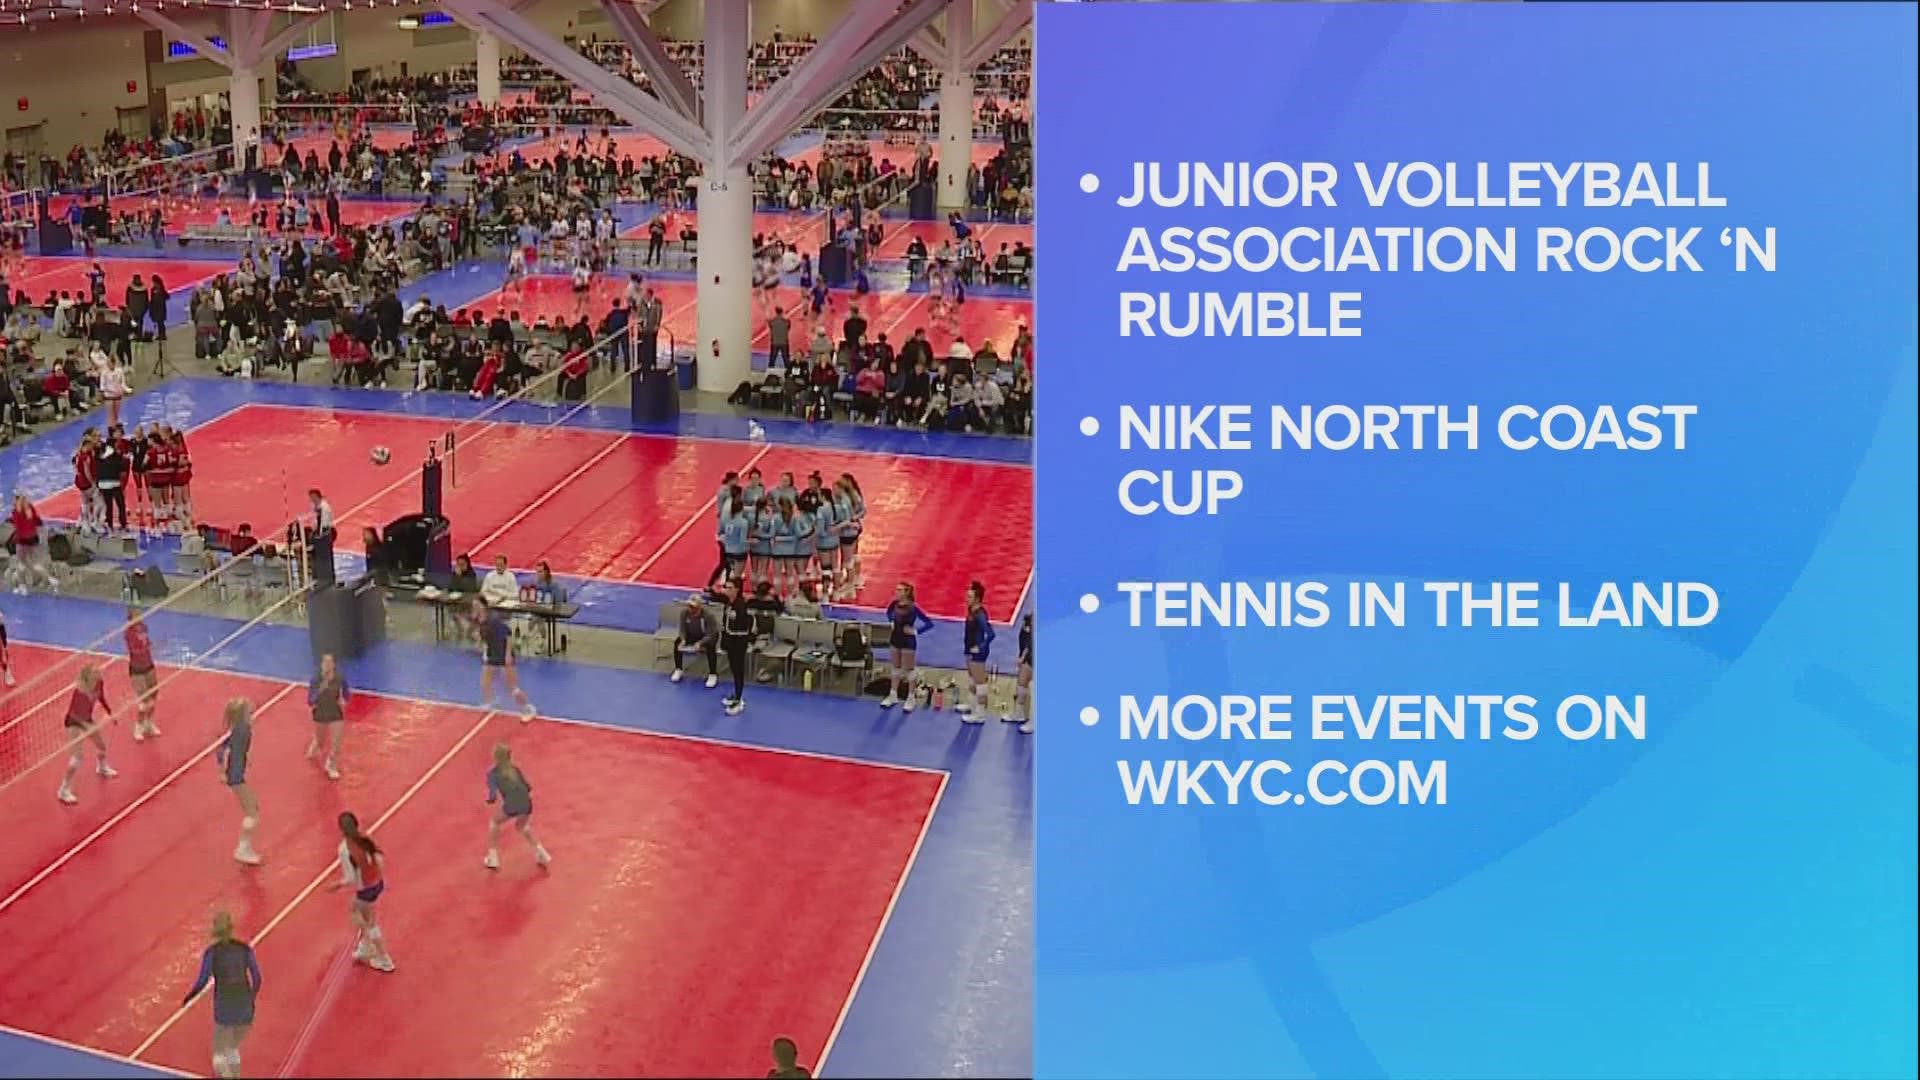 Among the events is a Junior Volleyball Association tournament, with more than 450 girls' volleyball teams coming to Cleveland.